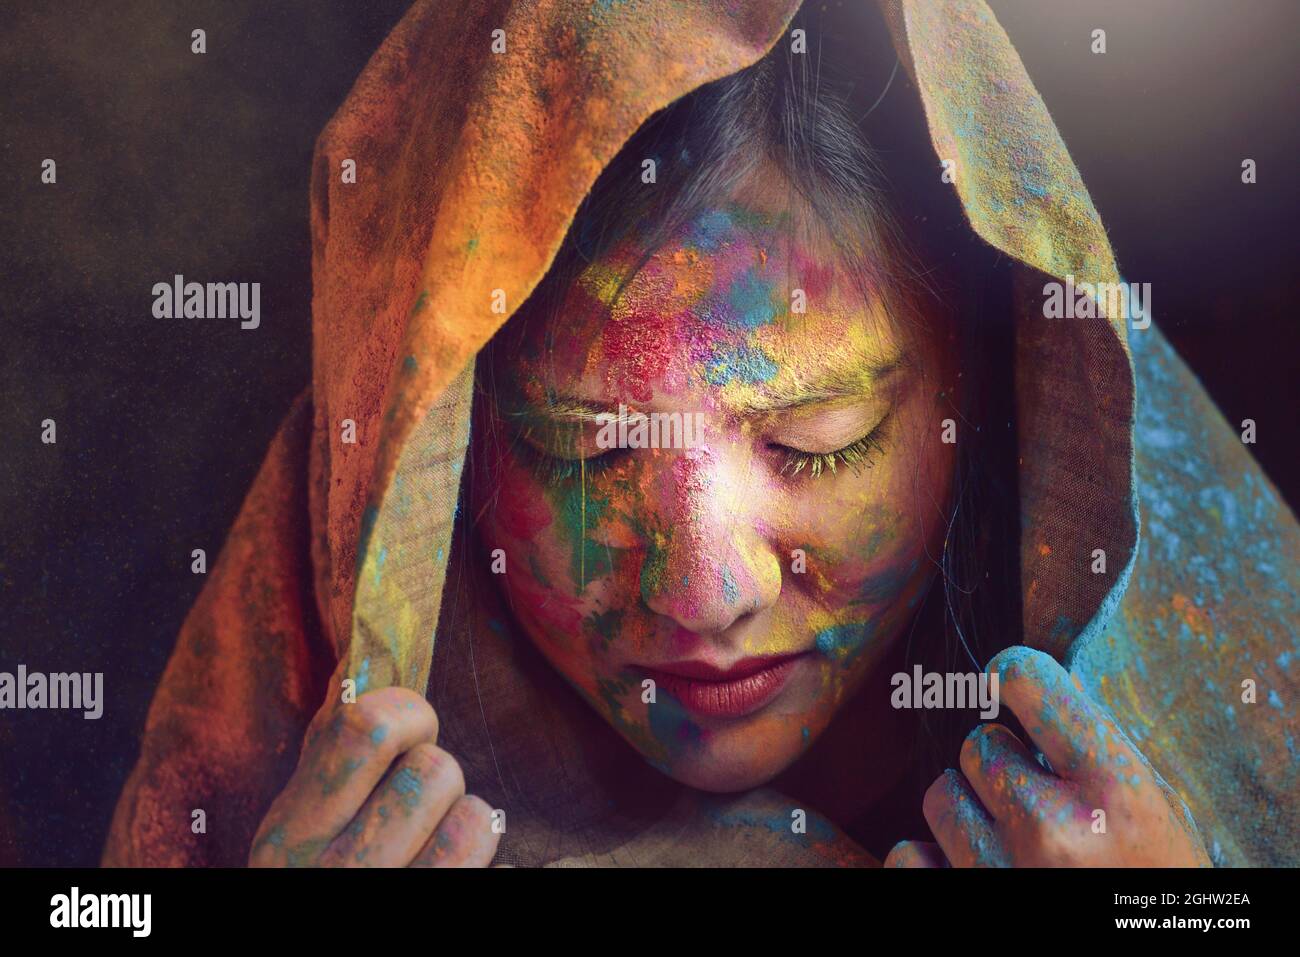 Portrait of an Indian Woman covered in multi coloured powder during Holi festival Stock Photo